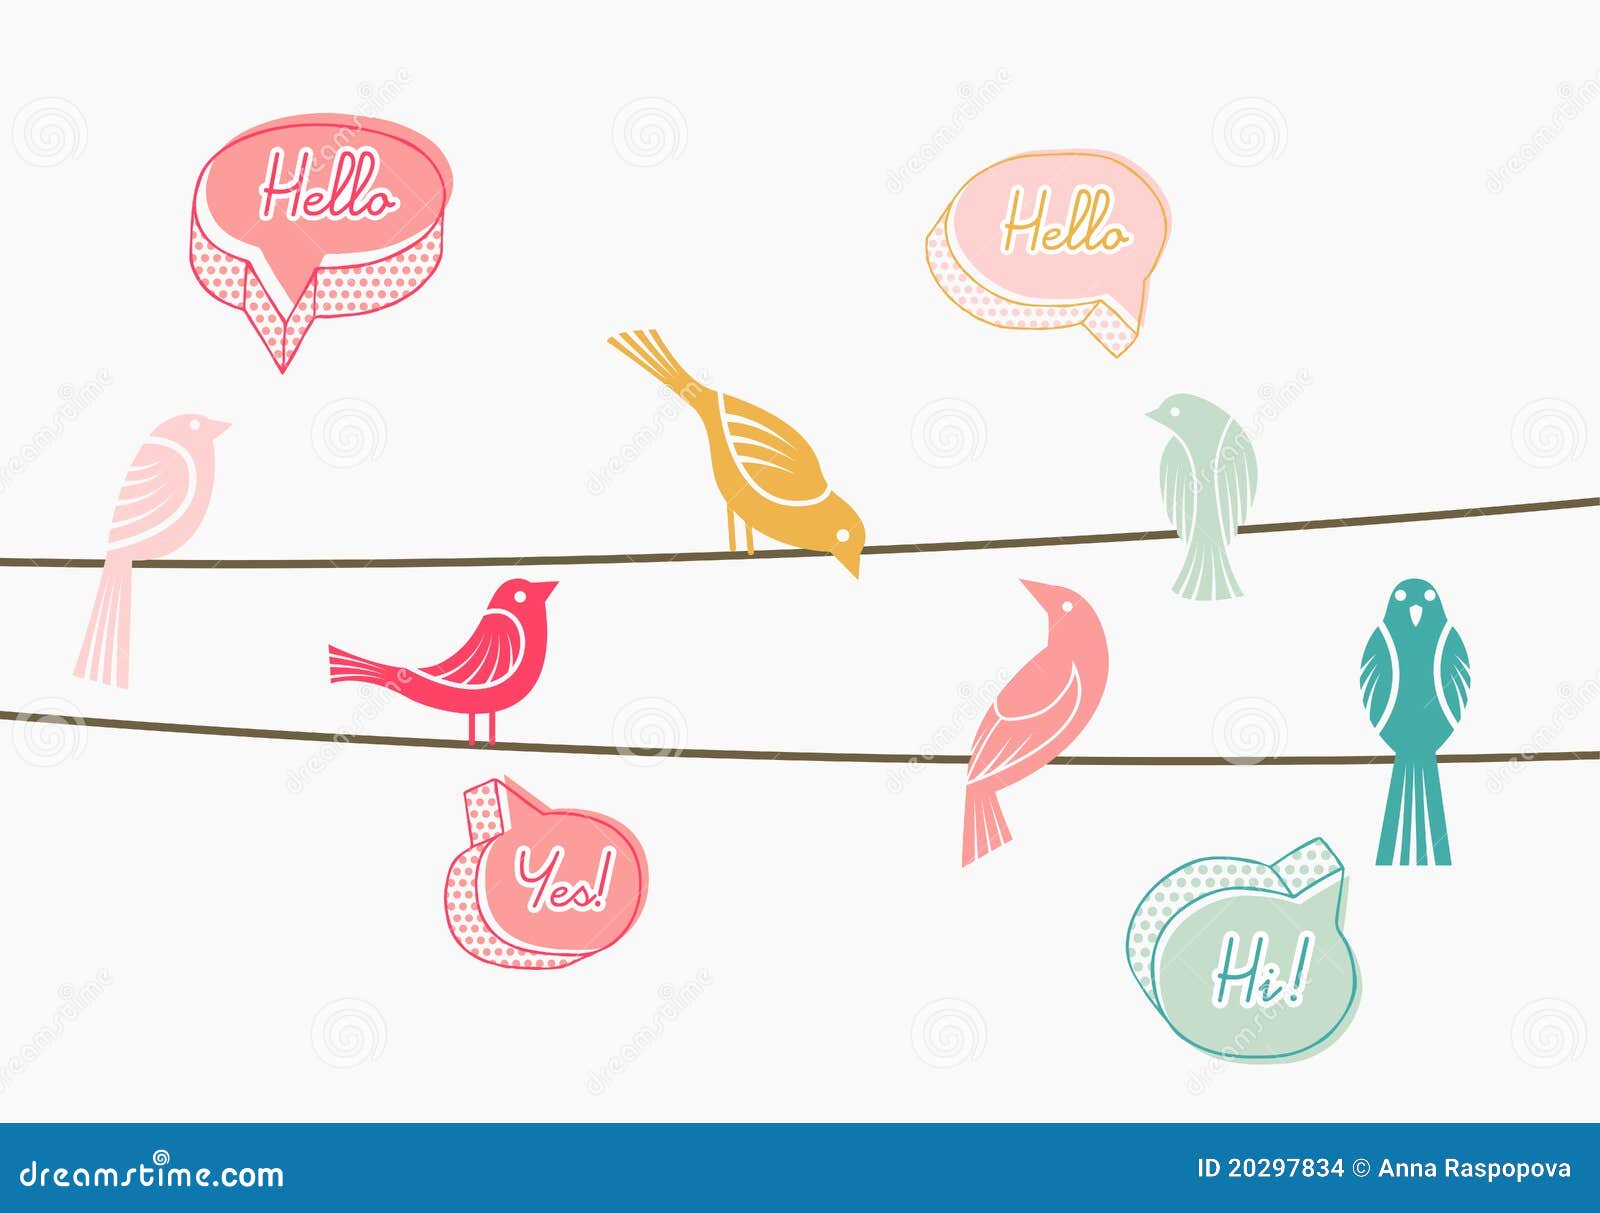 chatting birds on wires